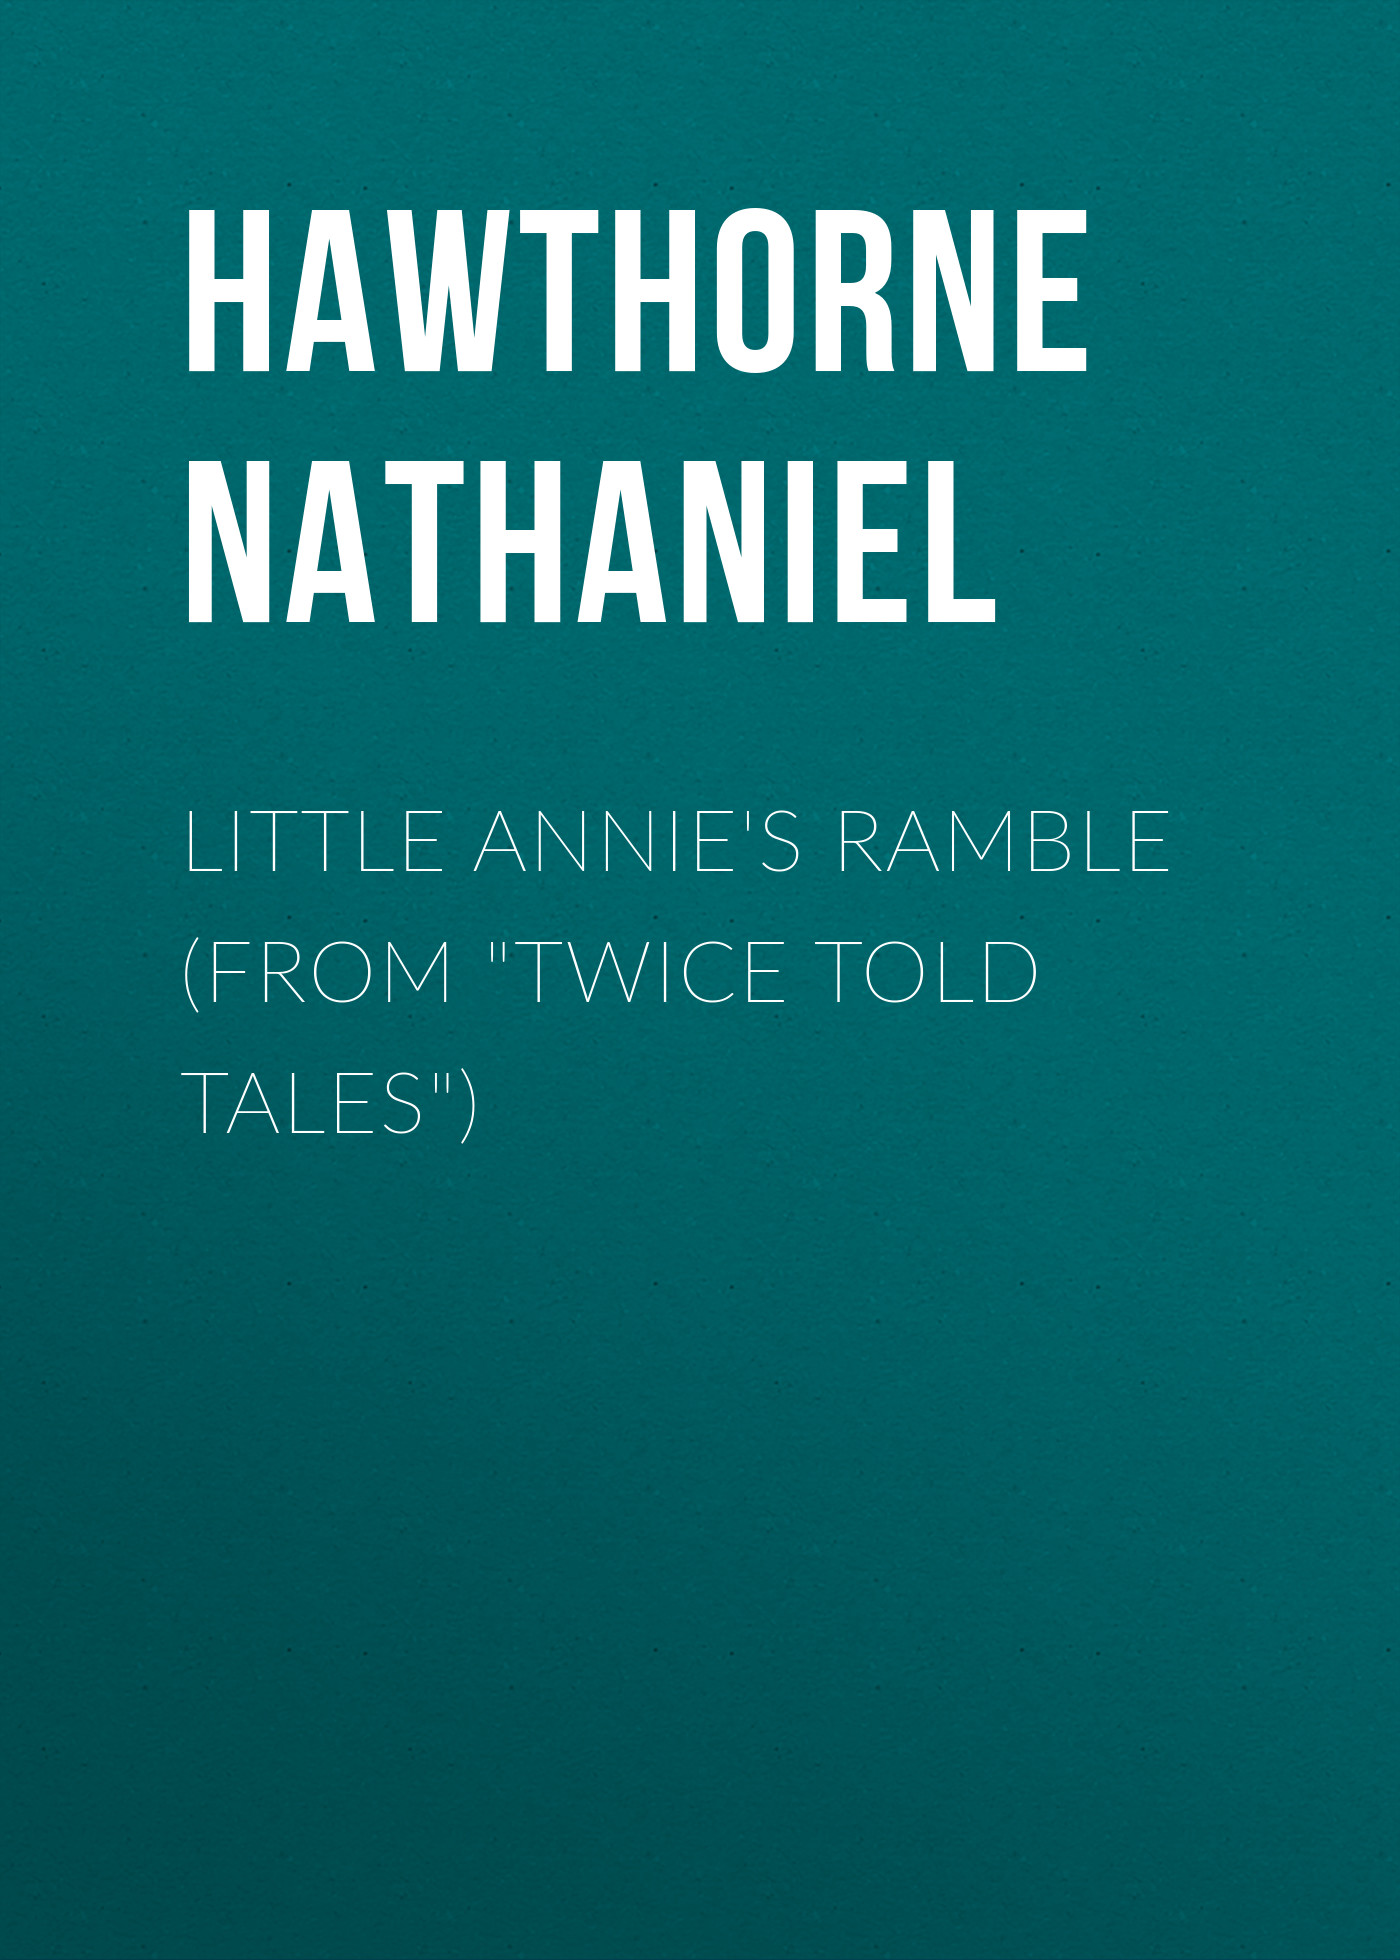 Little Annie's Ramble (From"Twice Told Tales")